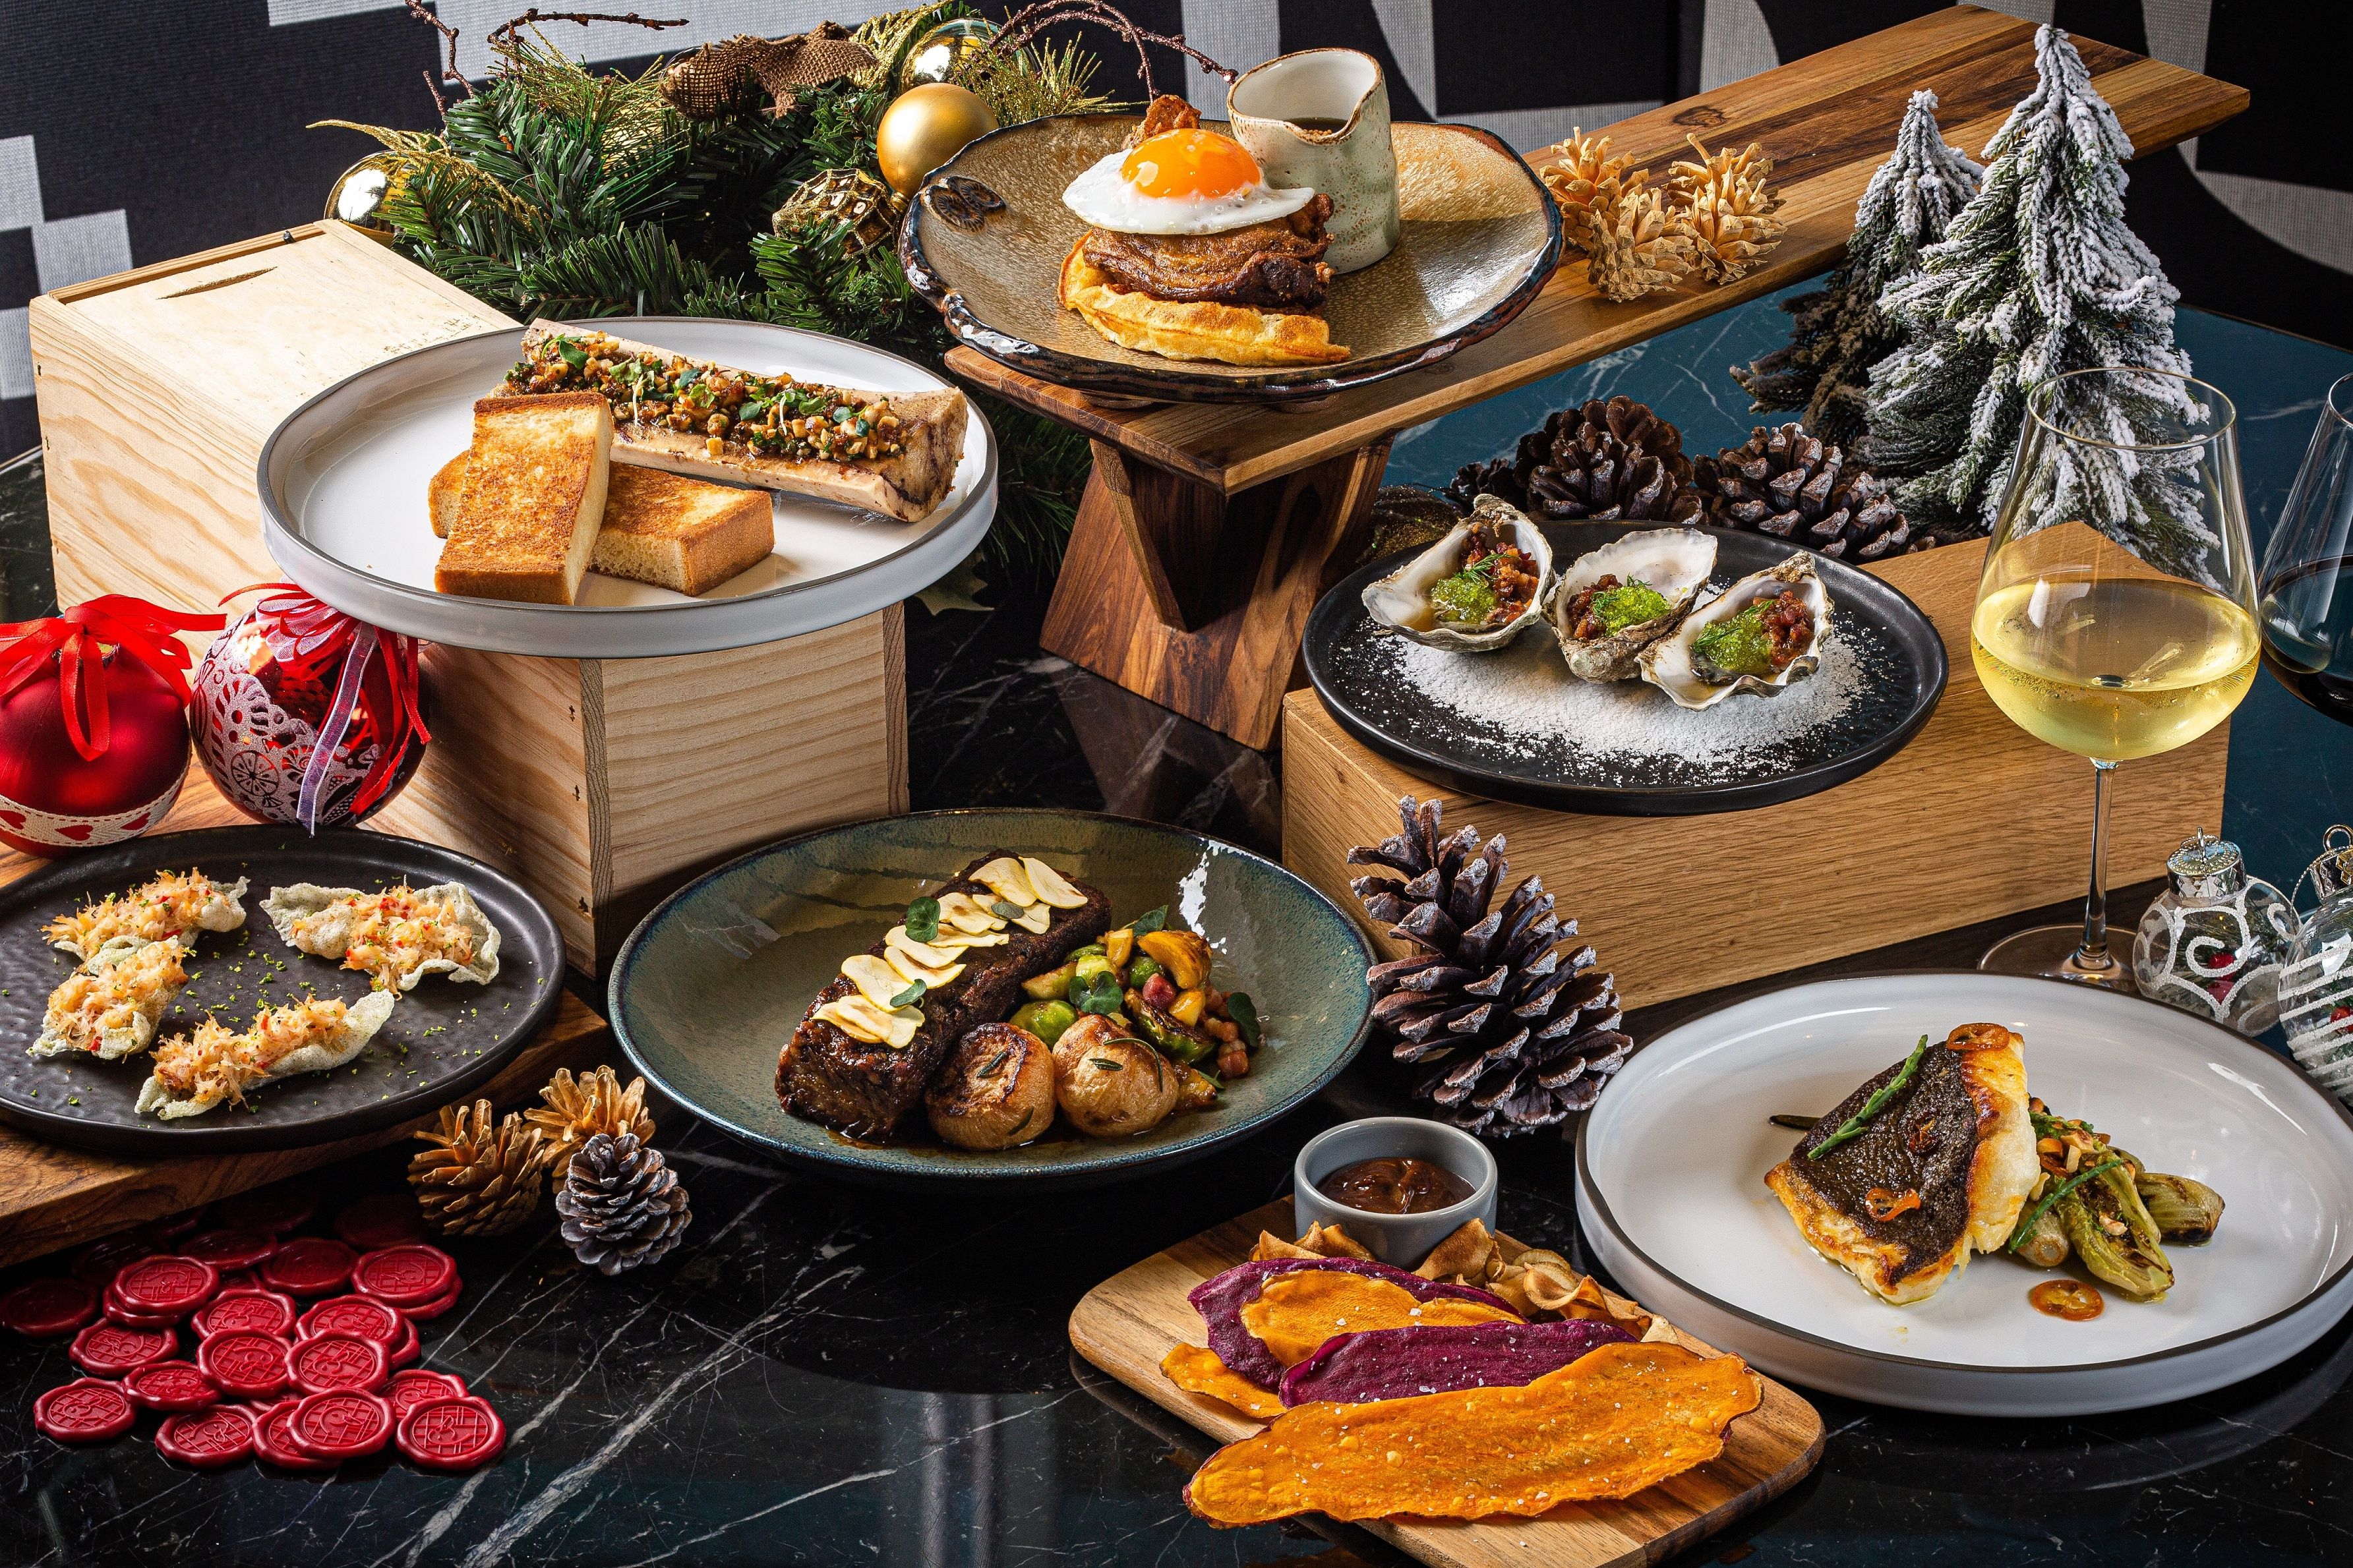 From dining to shopping, get your festivities in order at ifc this holiday season